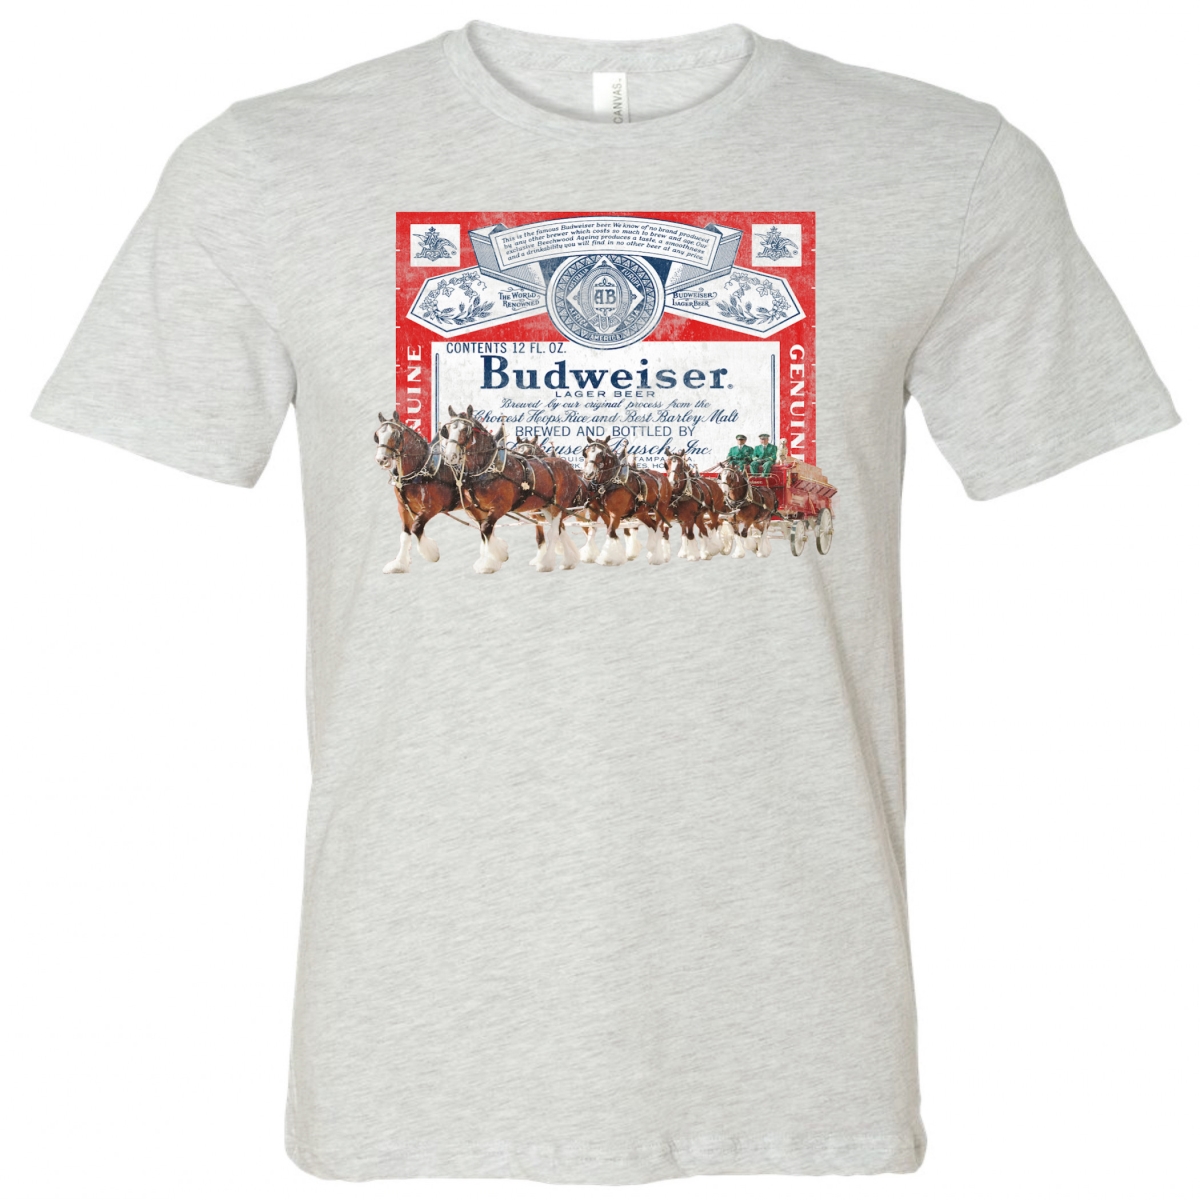 808283-large  Clydesdale Logo T-Shirt - Large -  Budweiser